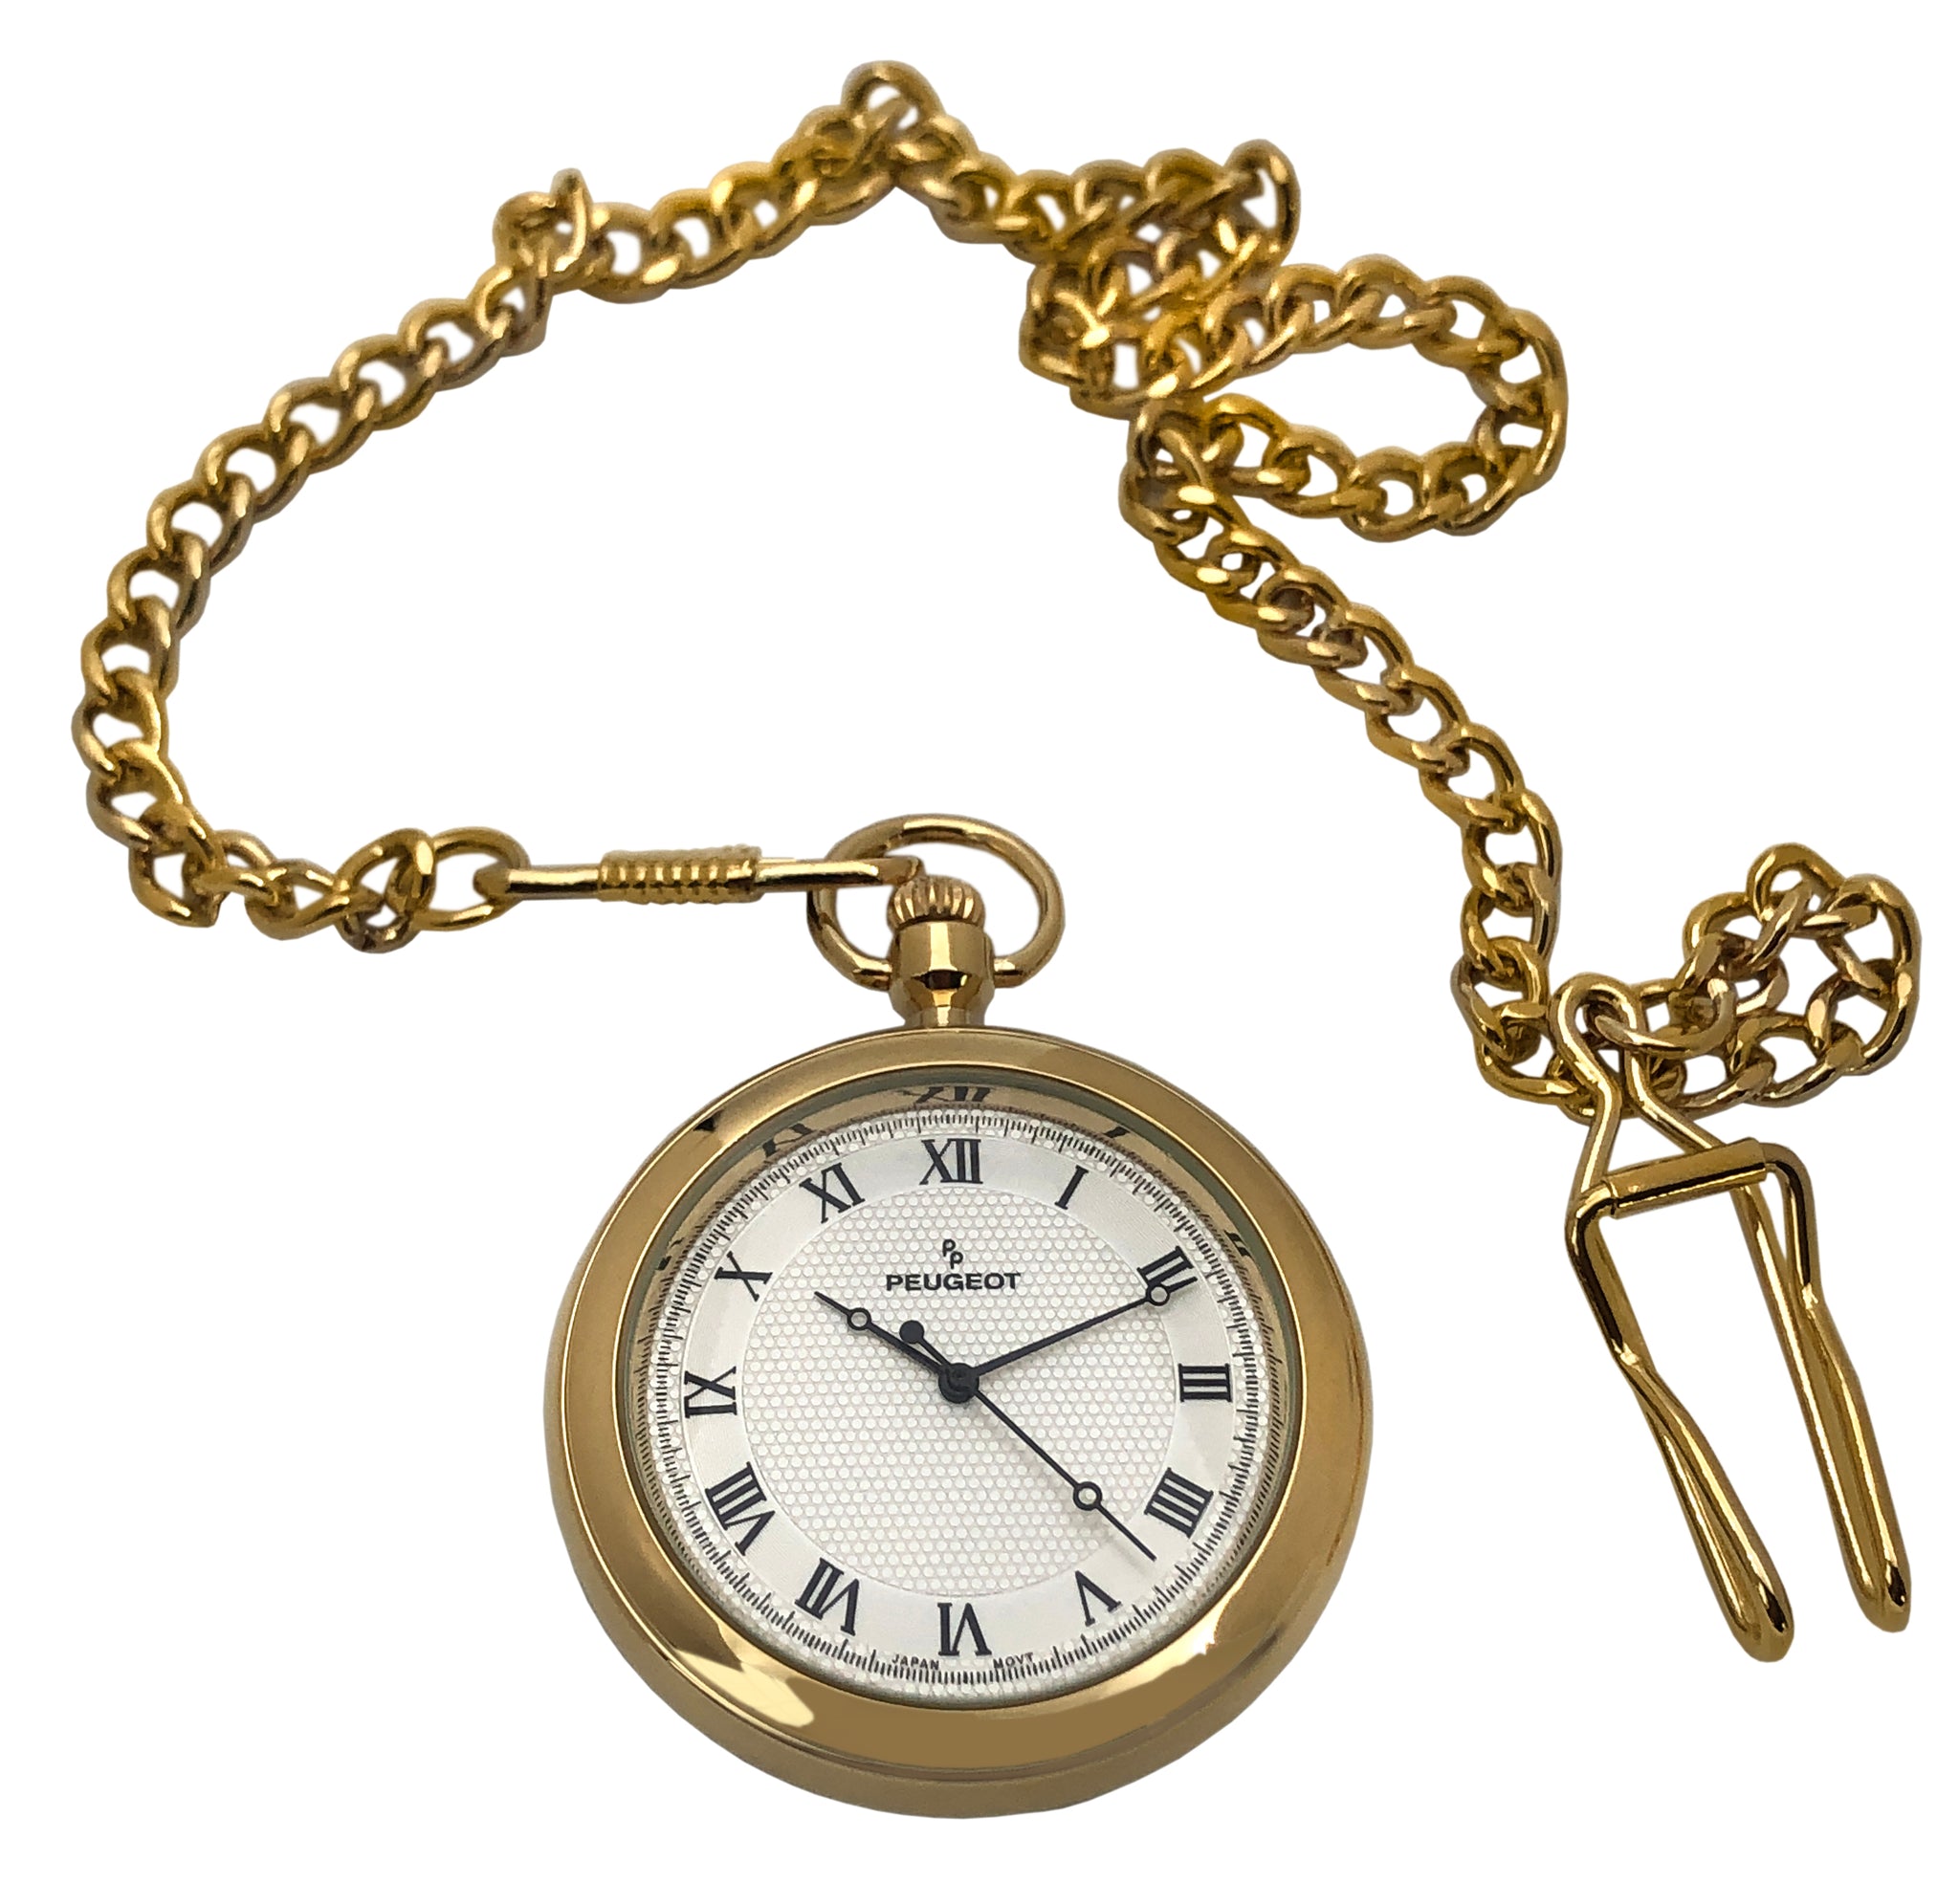 Peugeot Men's 14K Gold Plated Pocket Watch with Chain - Peugeot Watches